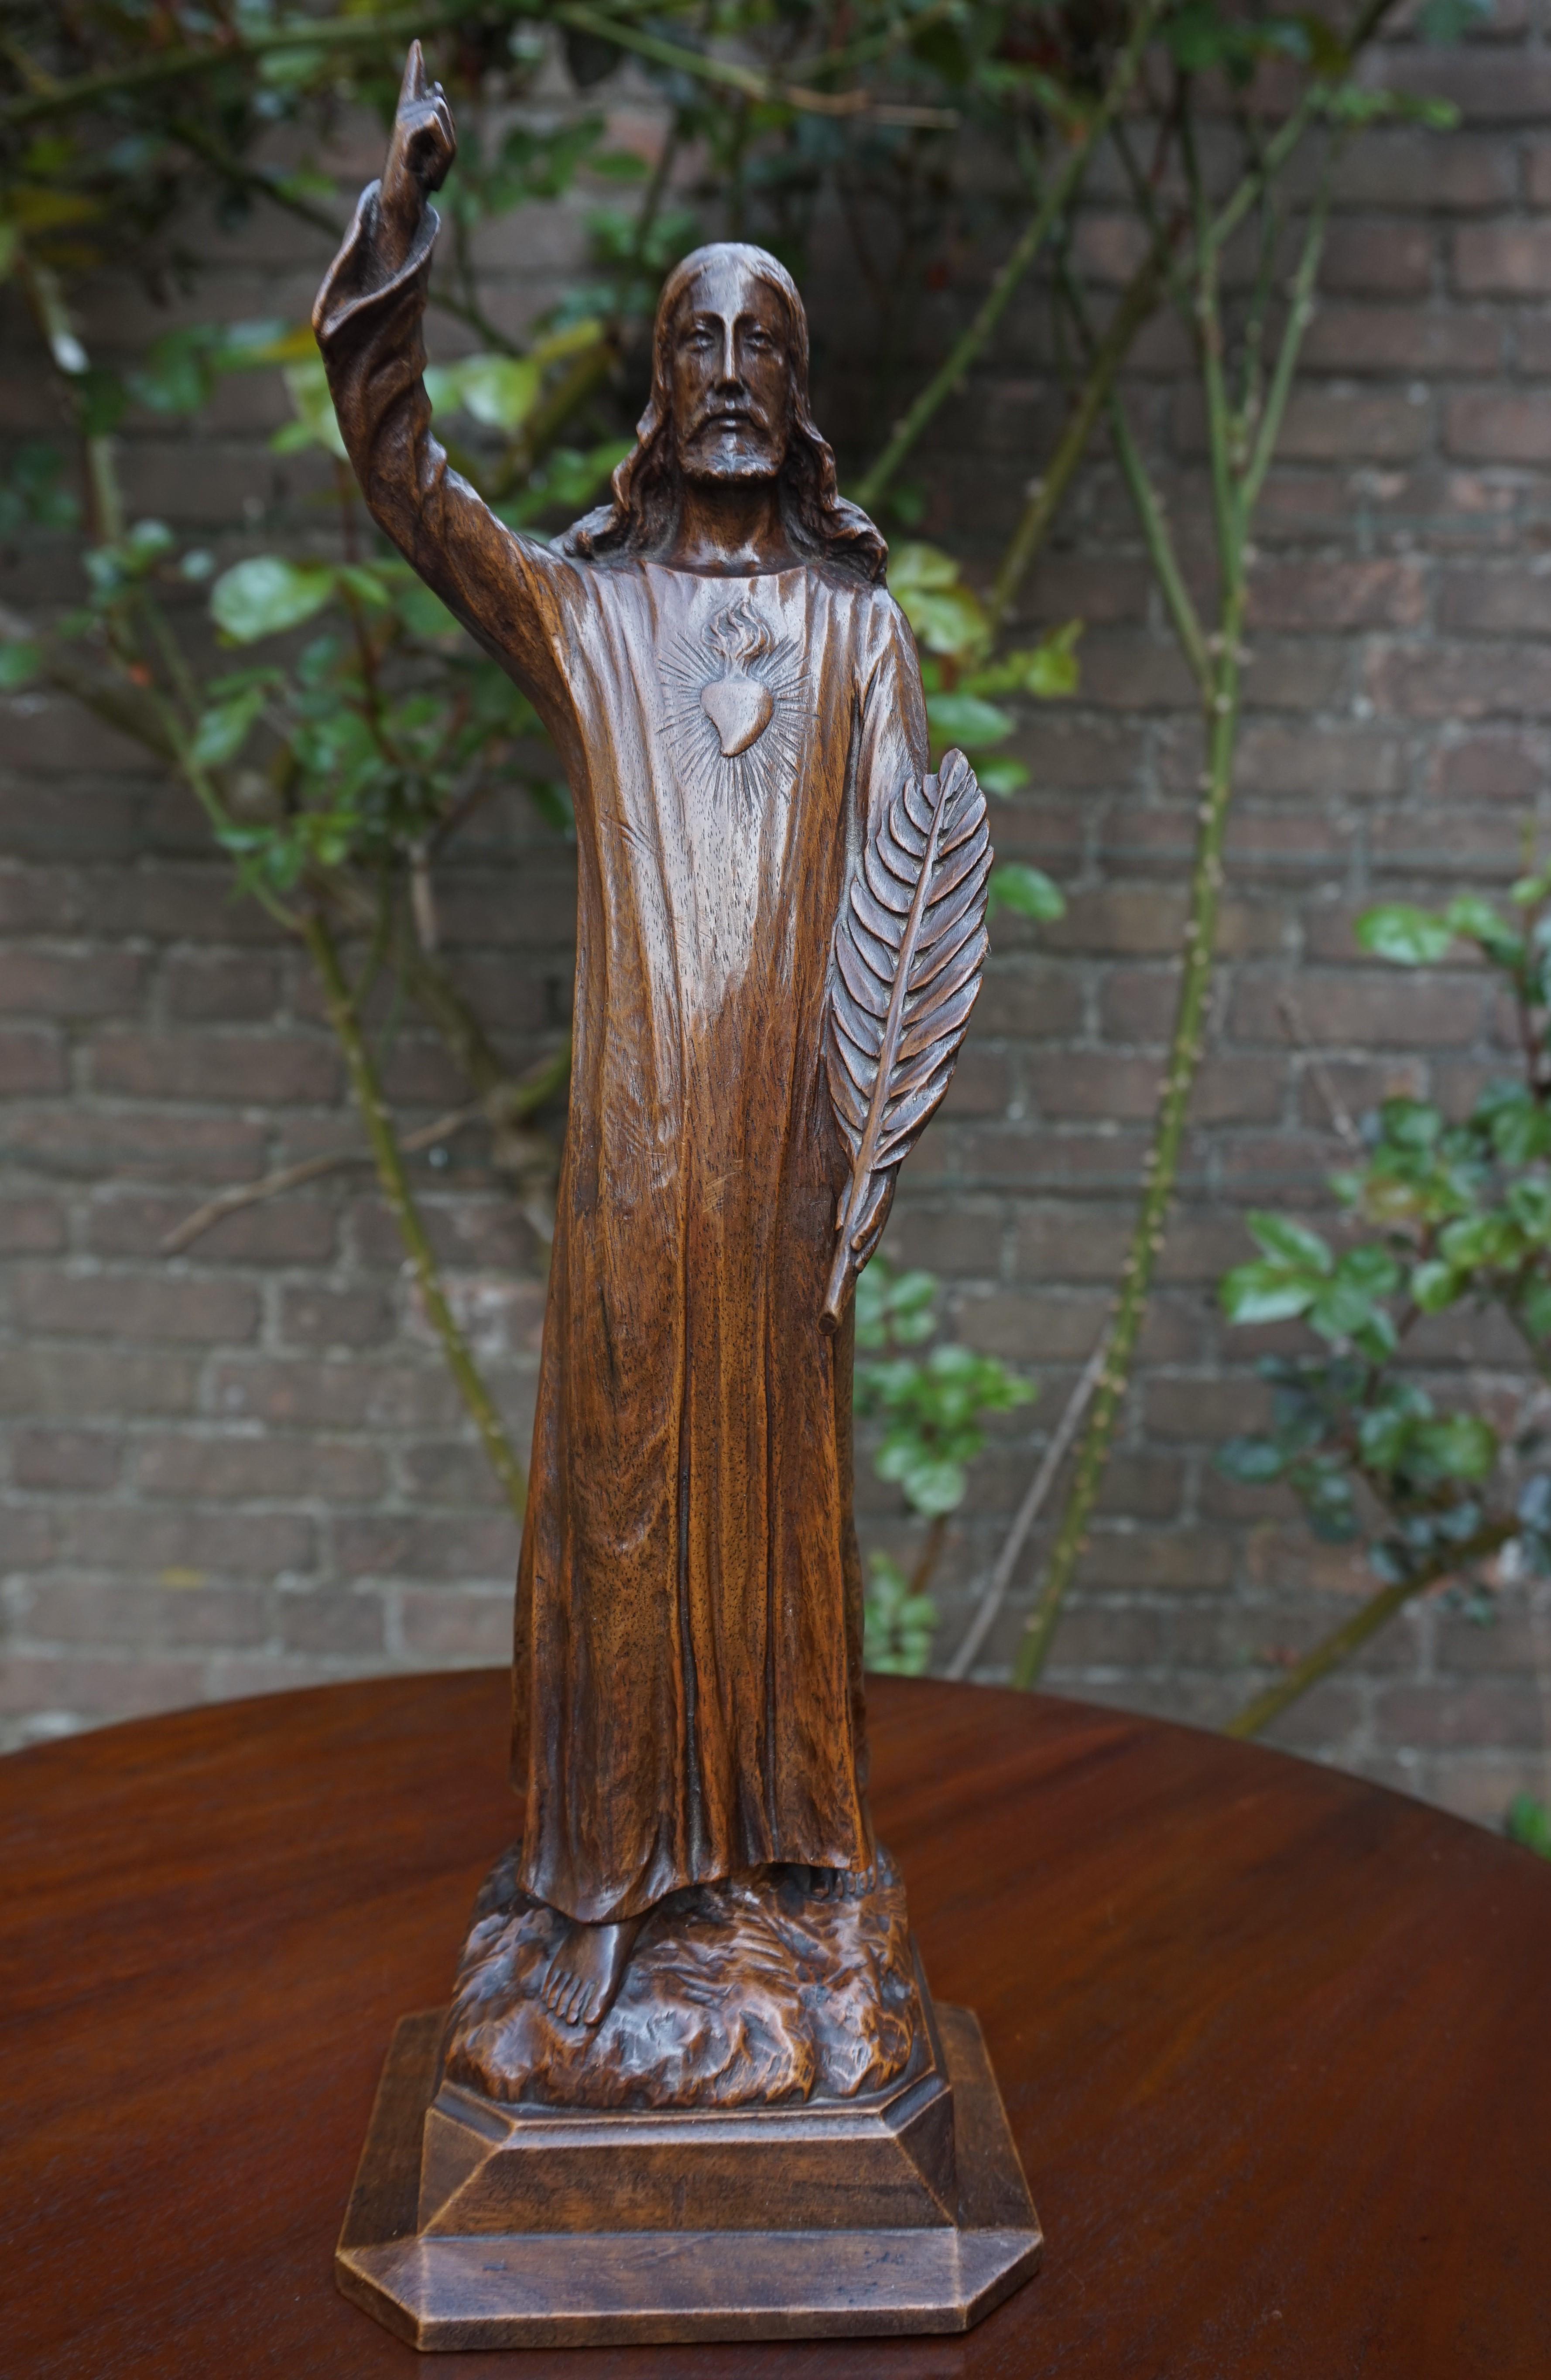 Finest quality carved sculpture of Jesus with a marvelous patina.

This marvelous quality, hand-carved sculpture of our Lord Jesus is among the finest we have ever seen and this truly is a work of religious art. It may be relatively small in size,